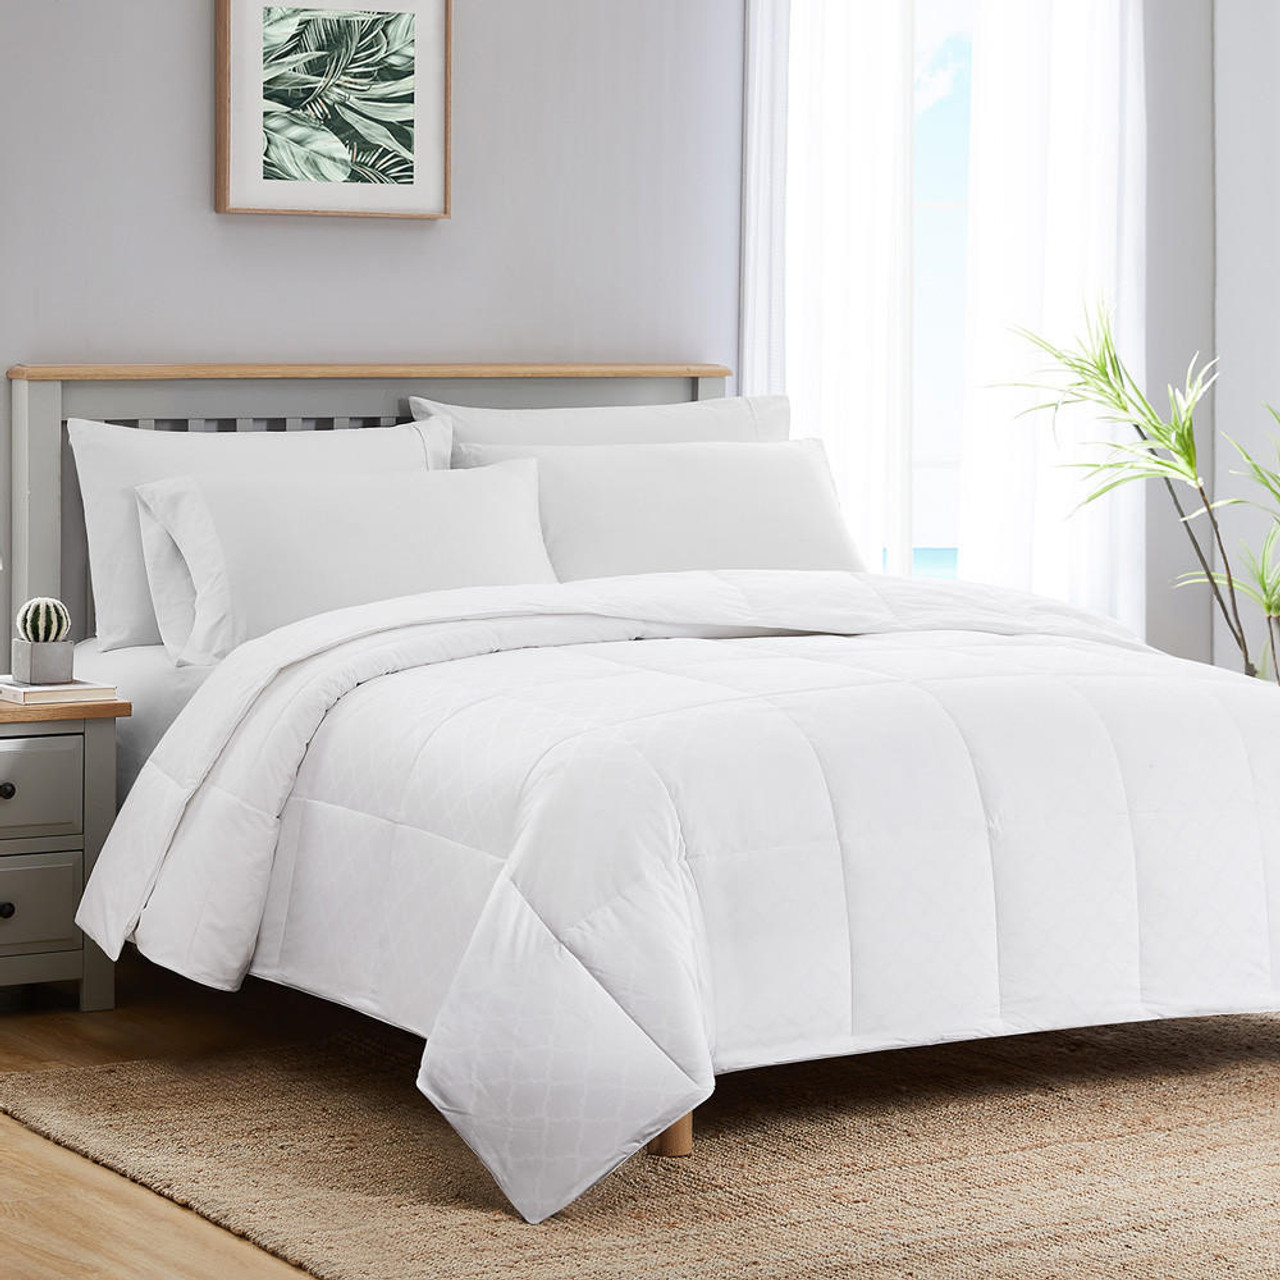 https://cdn11.bigcommerce.com/s-j8lceuq/images/stencil/1280x1280/products/688/5008/tommy-bahama-all-season-continuous-comfort-down-alternative-oversized-comforter-with-duvet-tabs-by-tommy-bahama-hypoallergenic__54732.1667903672.jpg?c=2